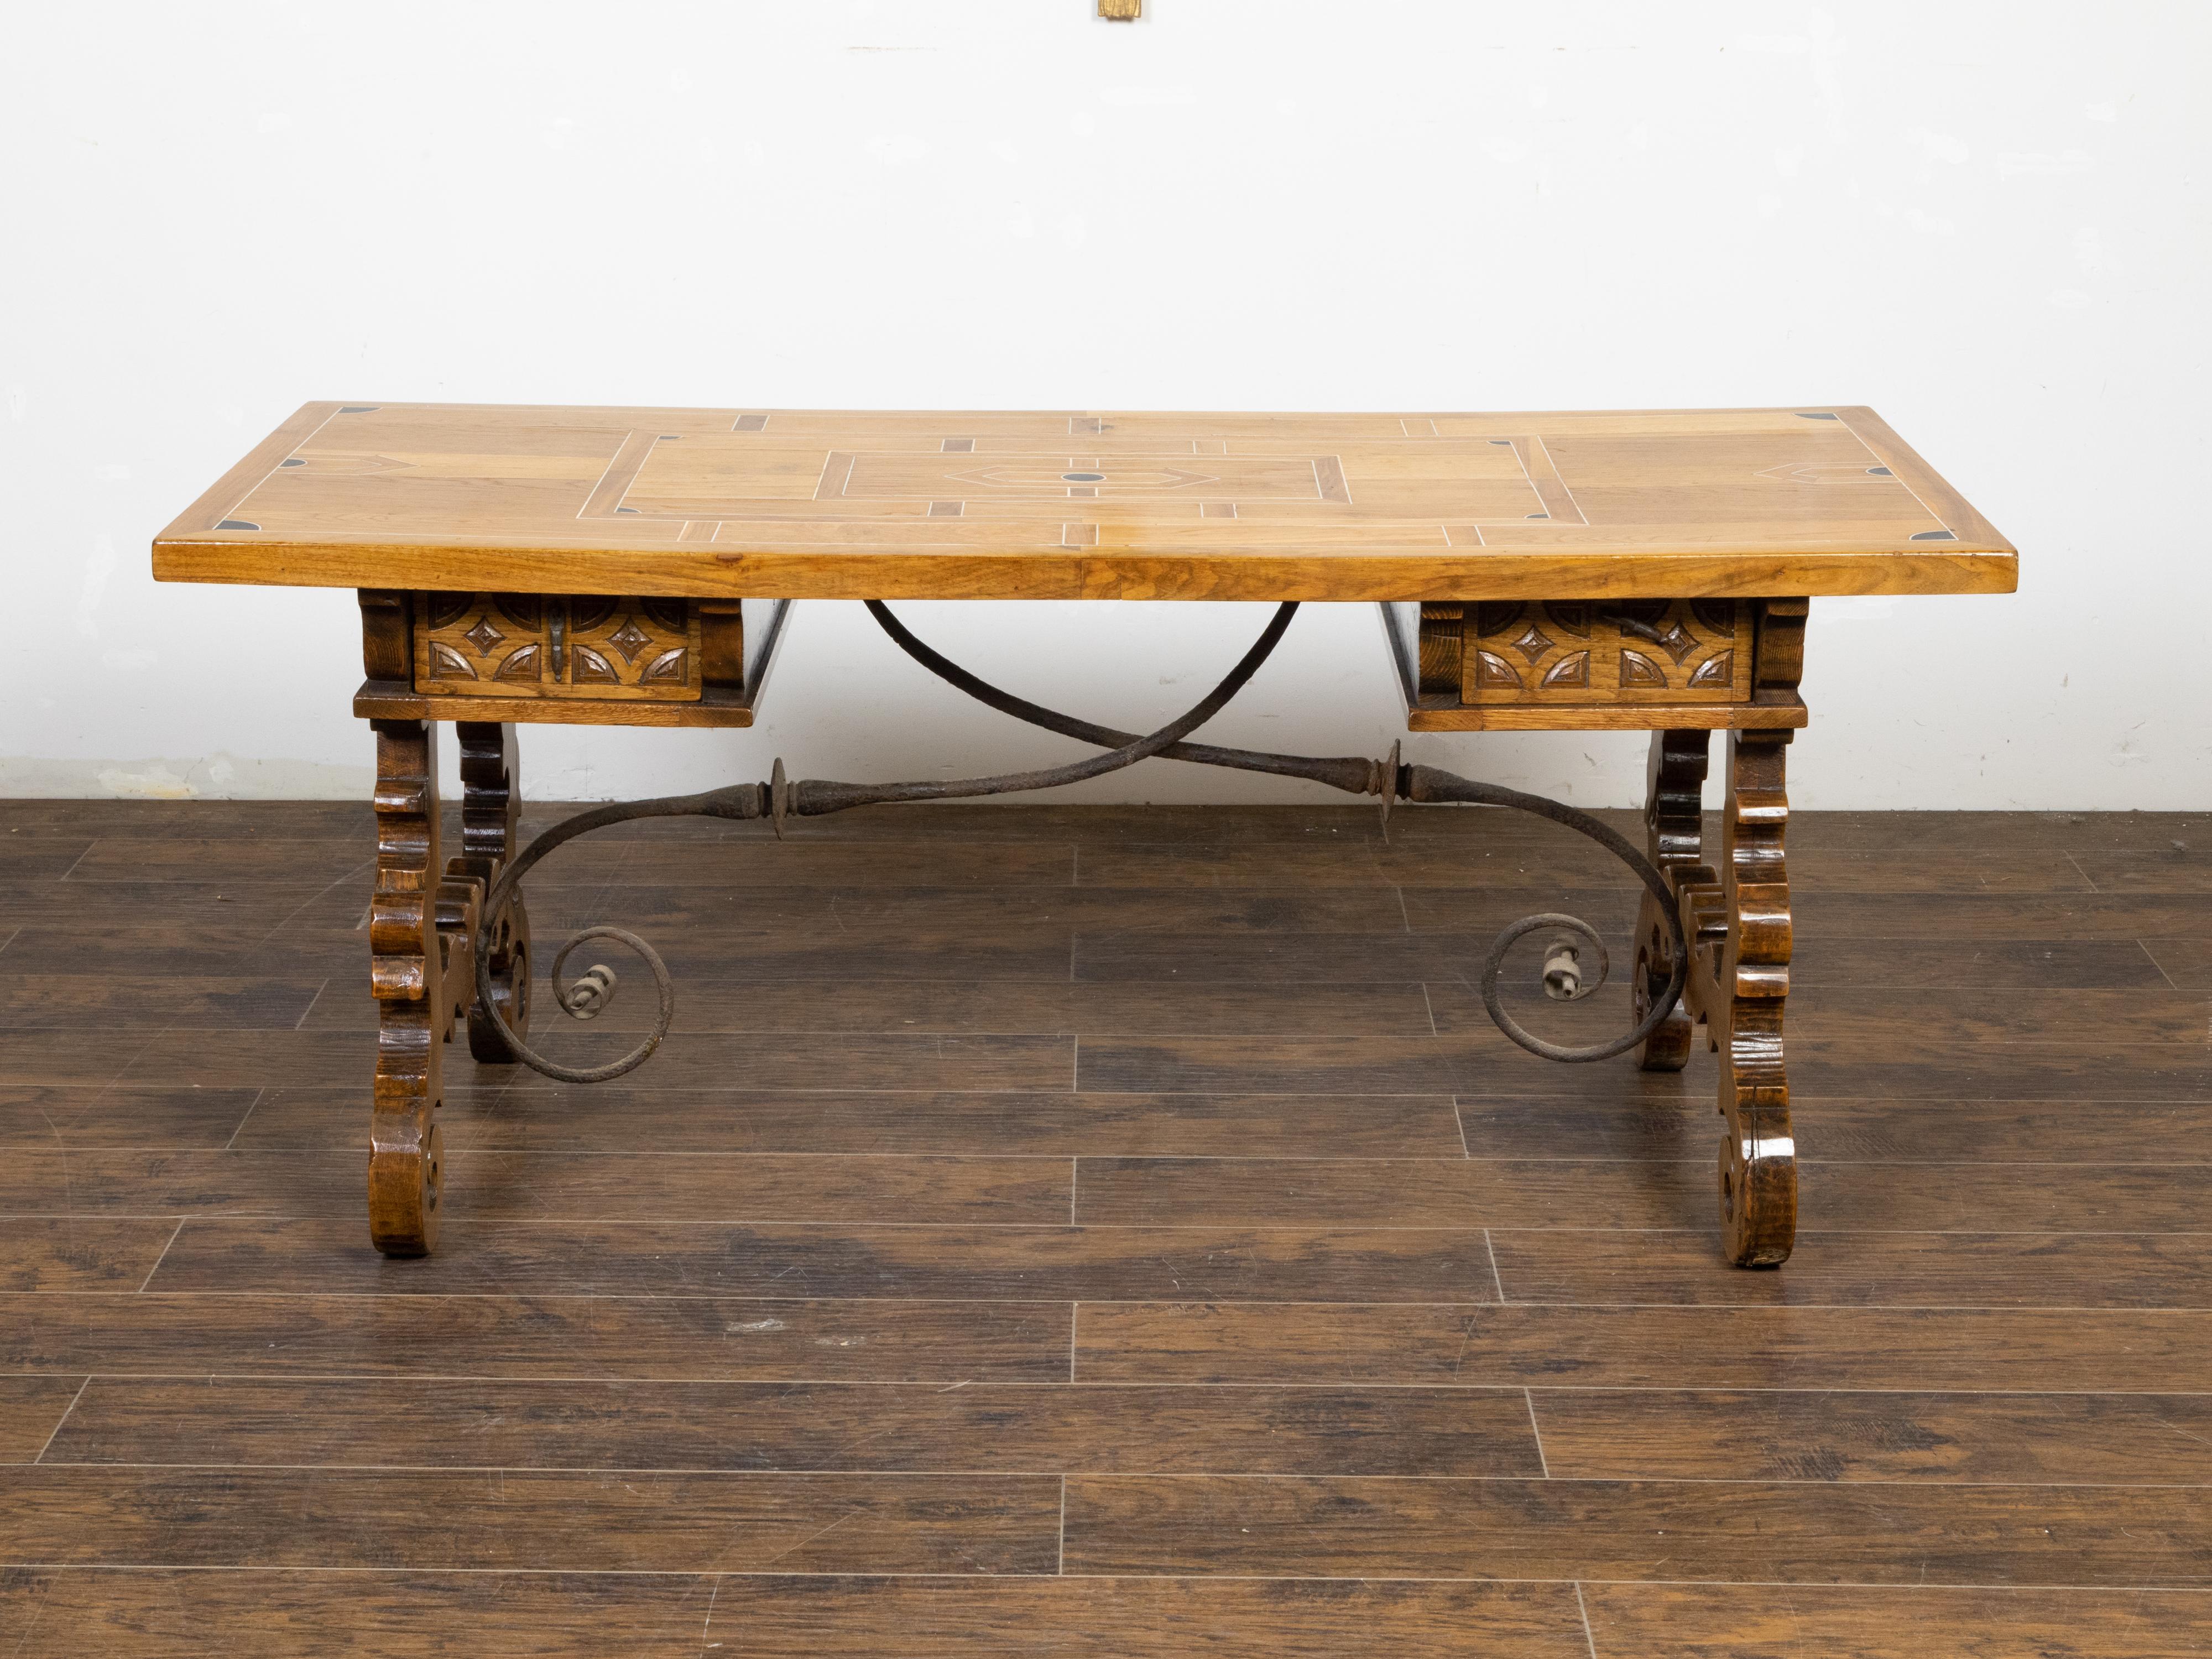 An Italian Baroque style walnut desk table from the late 19th century, with inlaid top, two drawers, lyre-shaped legs and iron stretchers. Created in Italy during the last quarter of the 19th century, this walnut table features an unusual top inlaid